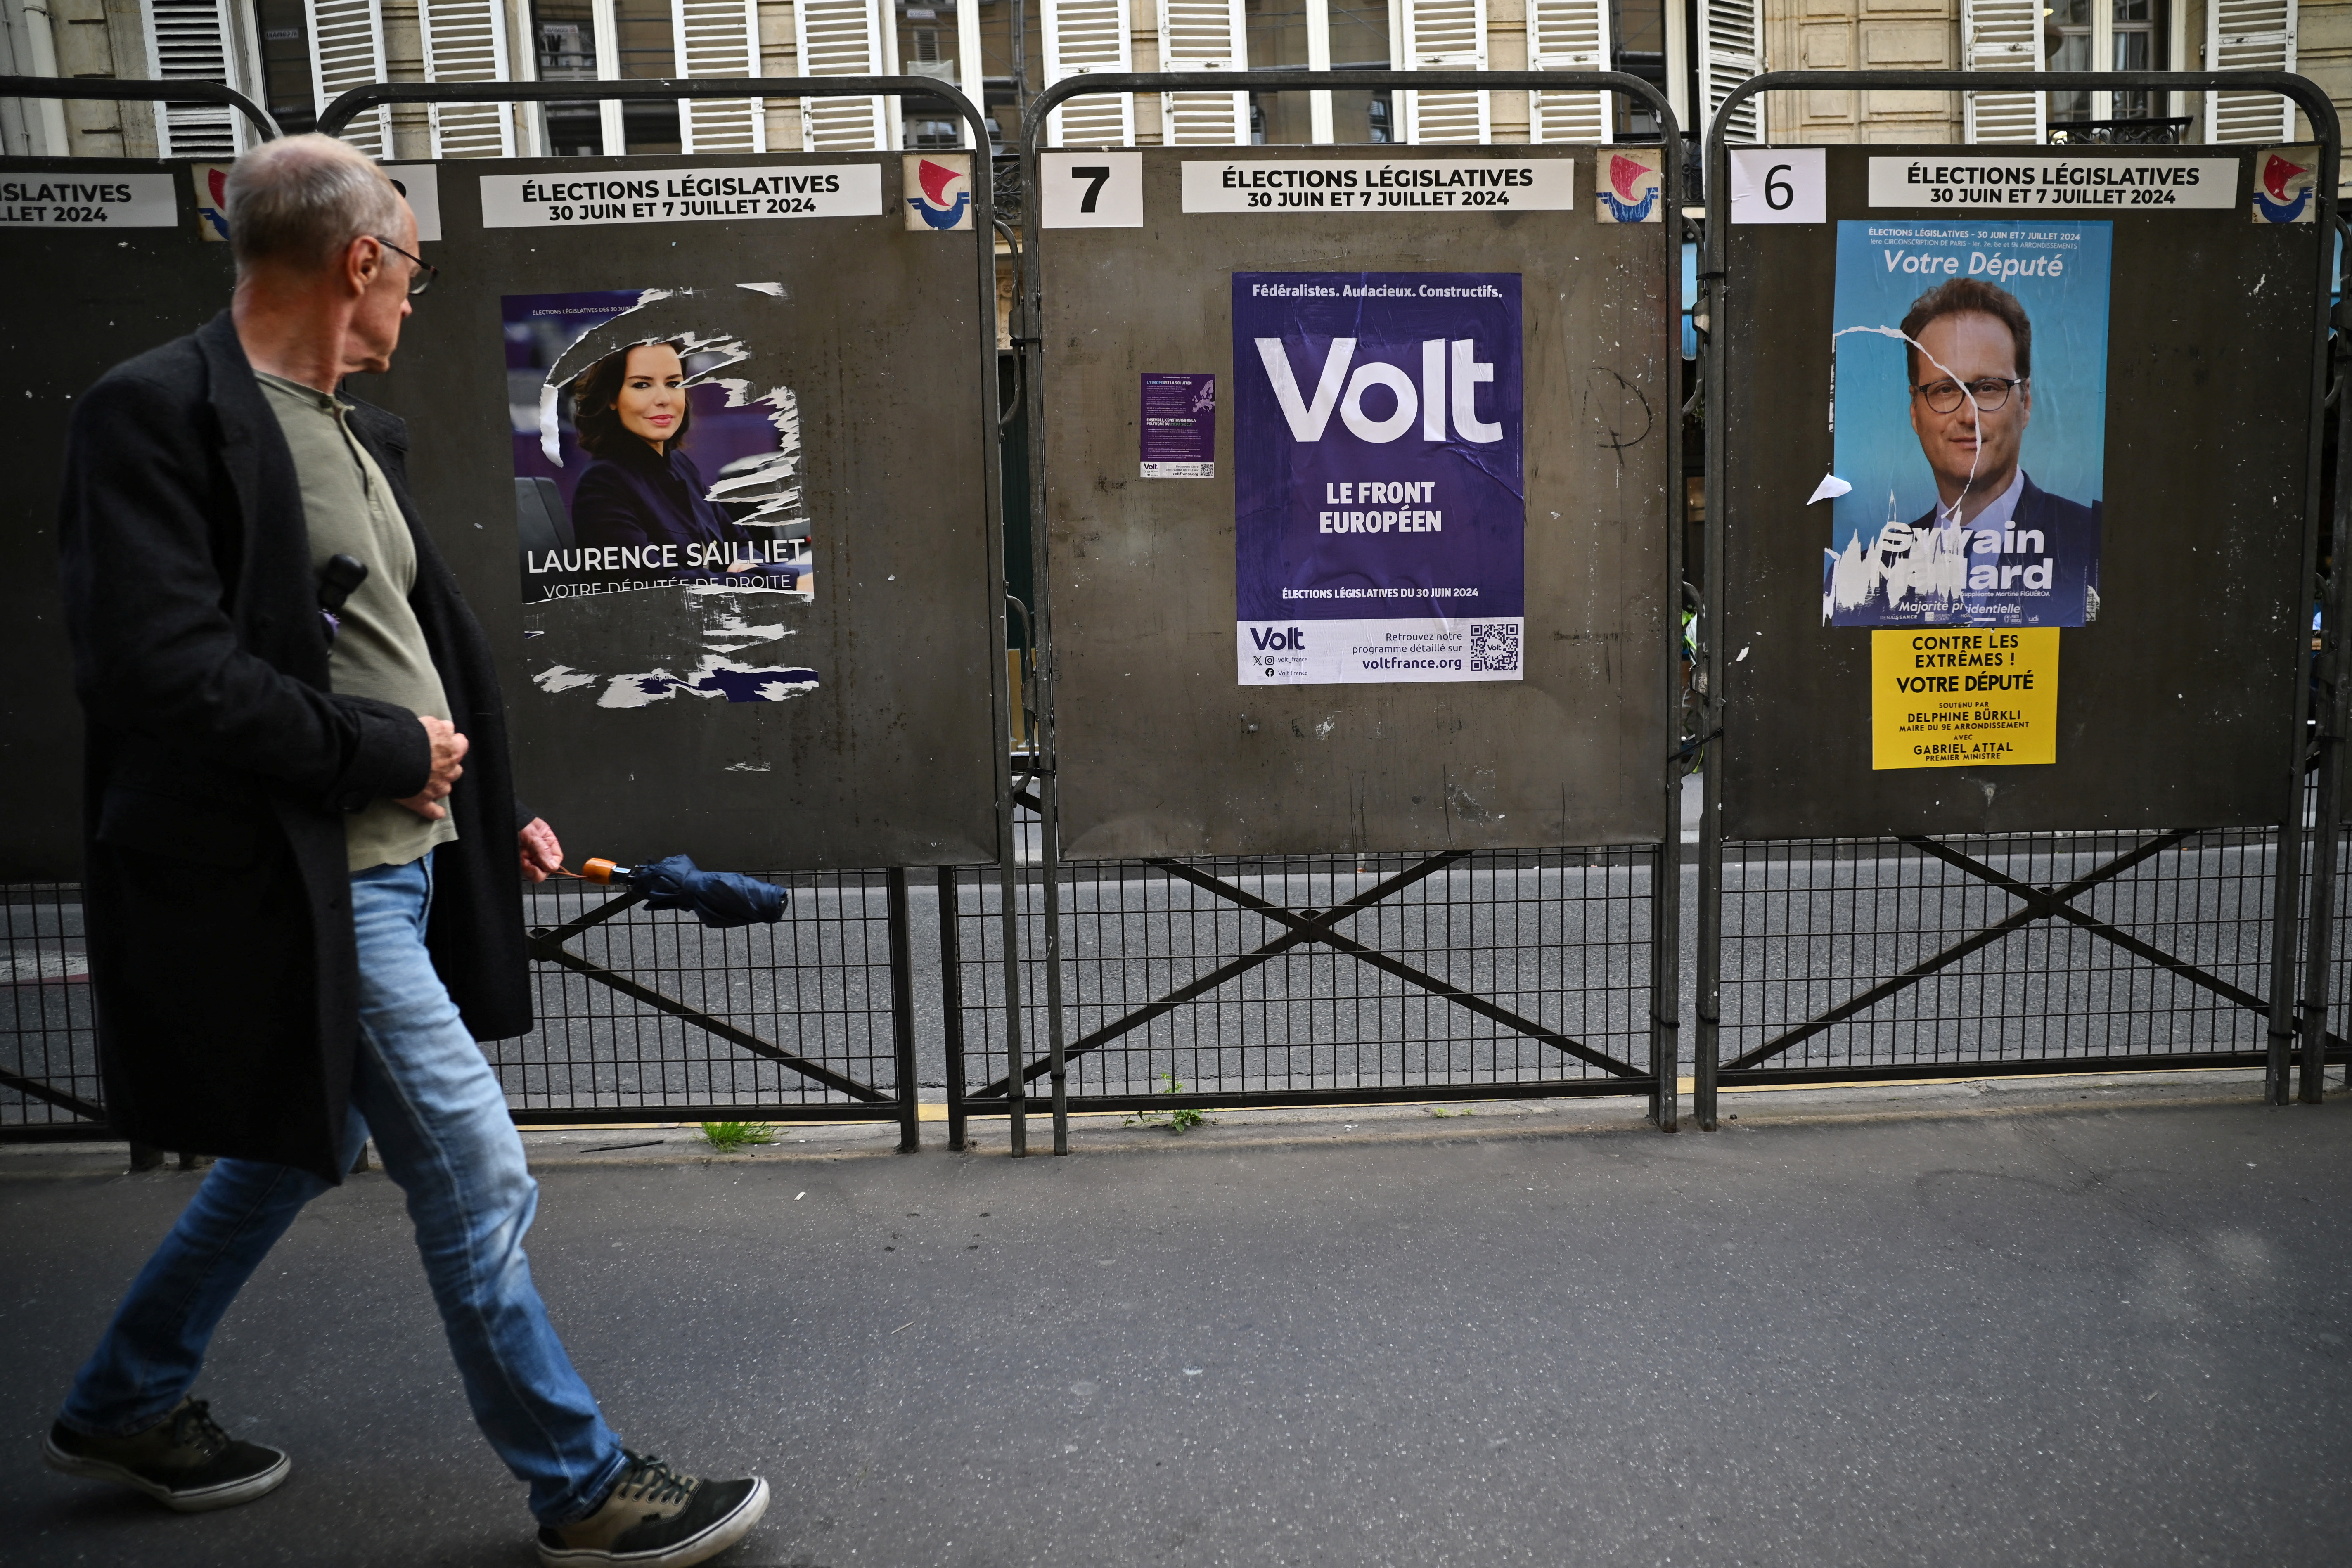 A man walks past election posters ahead of the French parliamentary elections in Paris